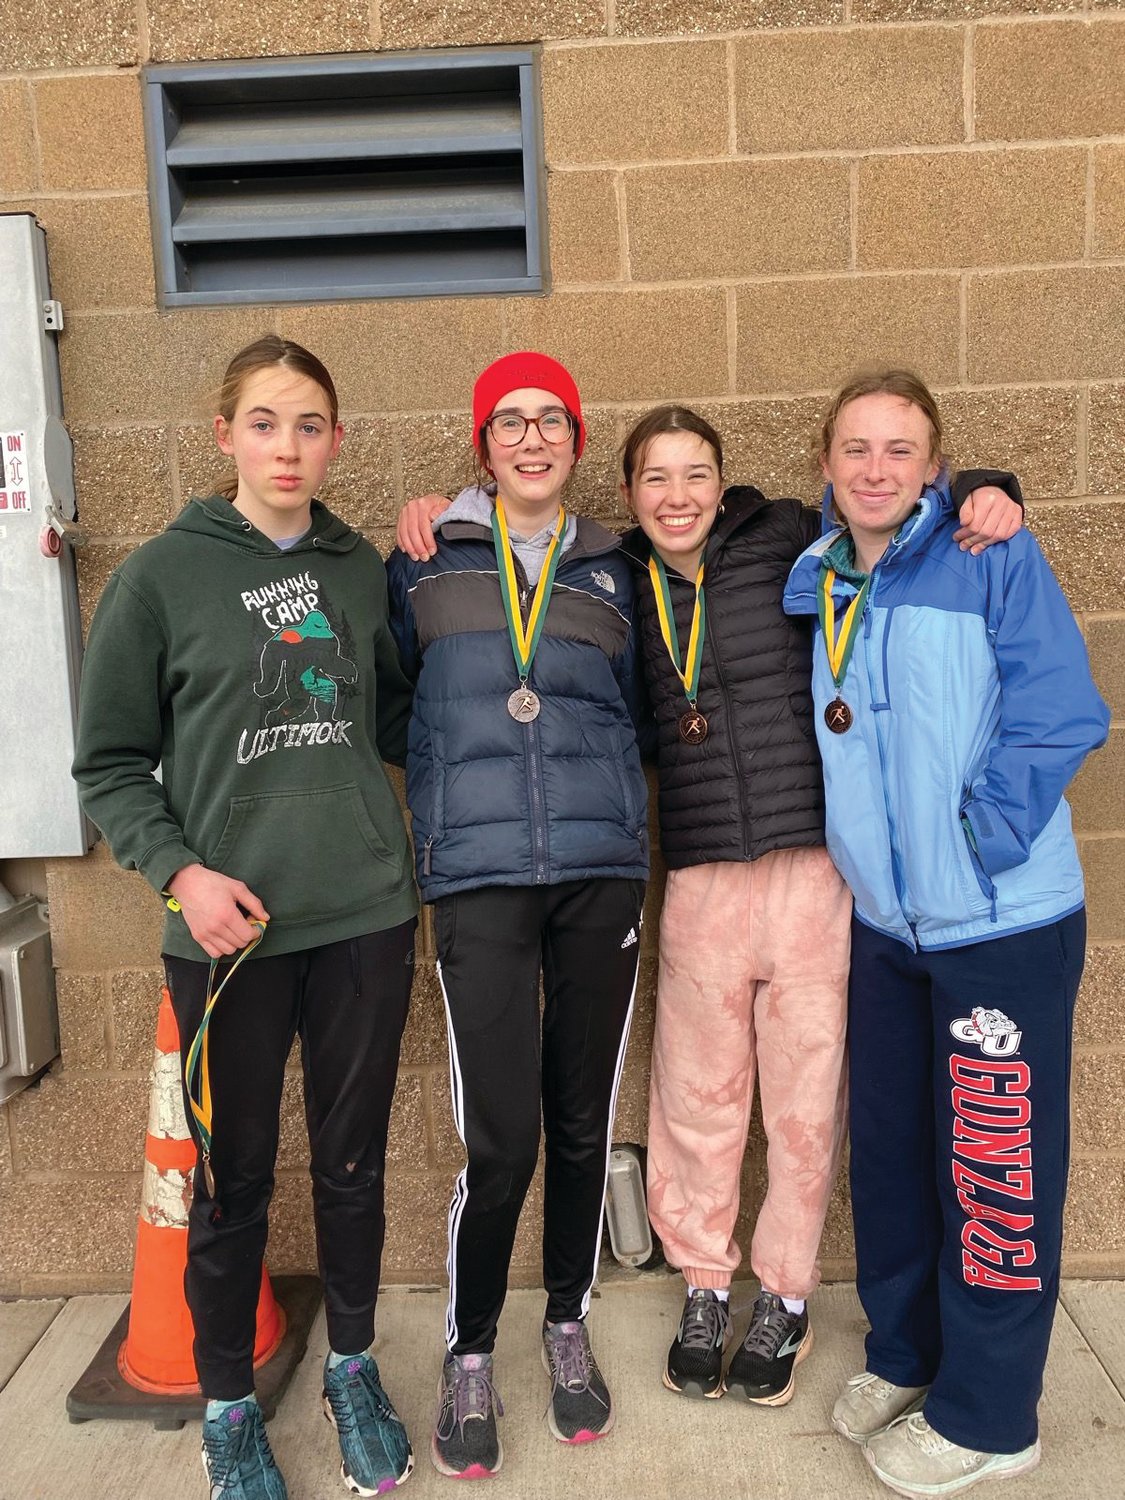 Rivals relay runners Fiona Fraser, Michael Gregg, Aliyah Yearian, and Camryn Hines pose together after earning bronze in the 4x800-meter relay in Bellingham.